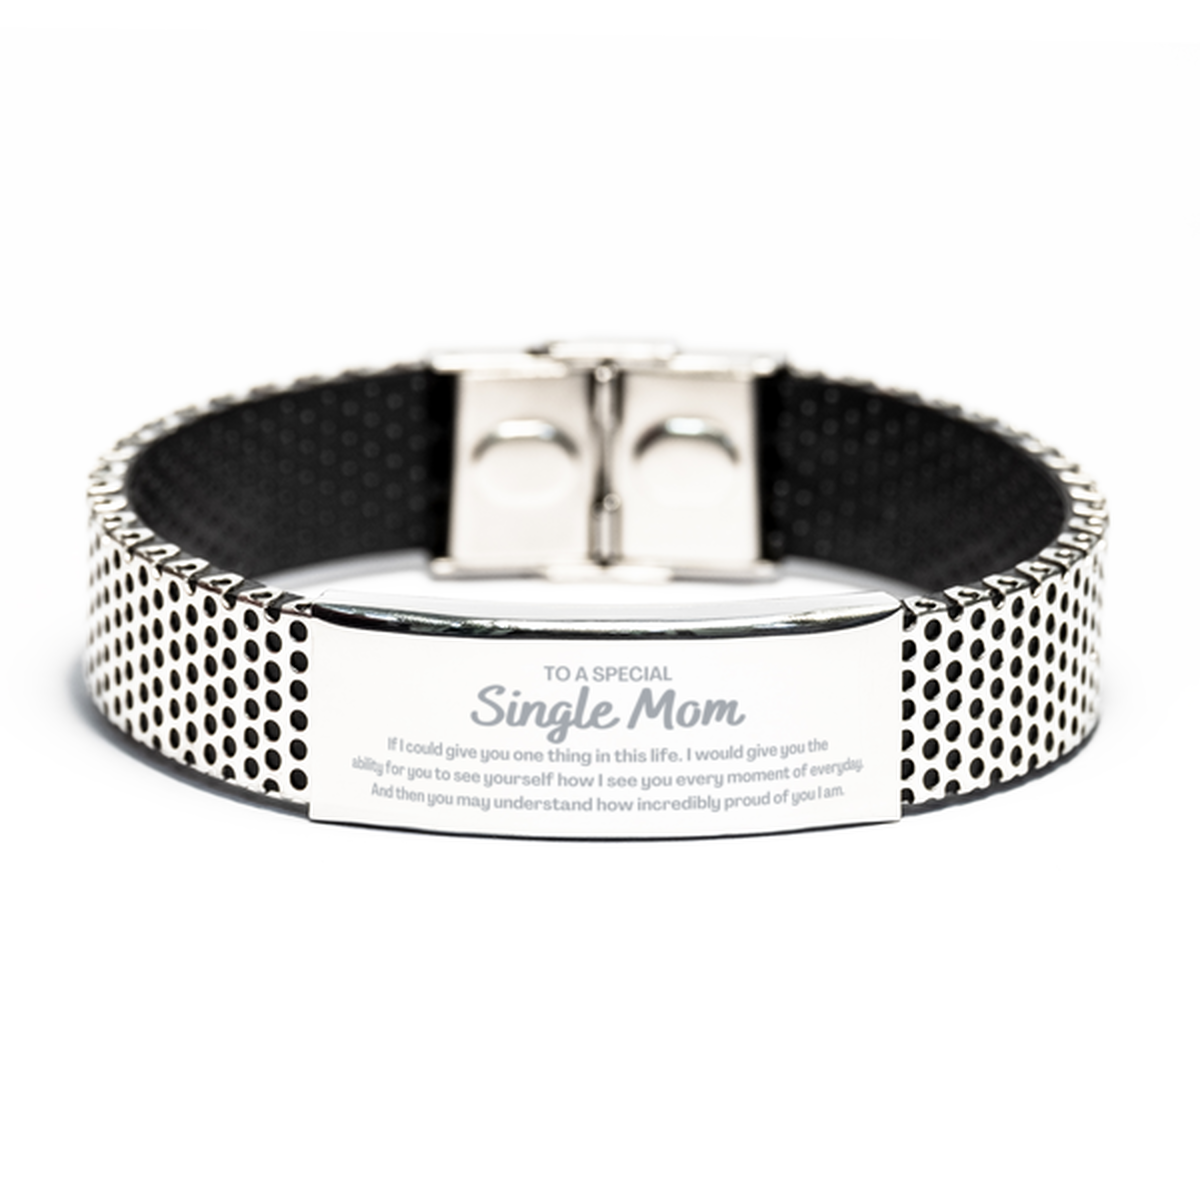 To My Single Mom Stainless Steel Bracelet, Gifts For Single Mom Engraved, Inspirational Gifts for Christmas Birthday, Epic Gifts for Single Mom To A Special Single Mom how incredibly proud of you I am